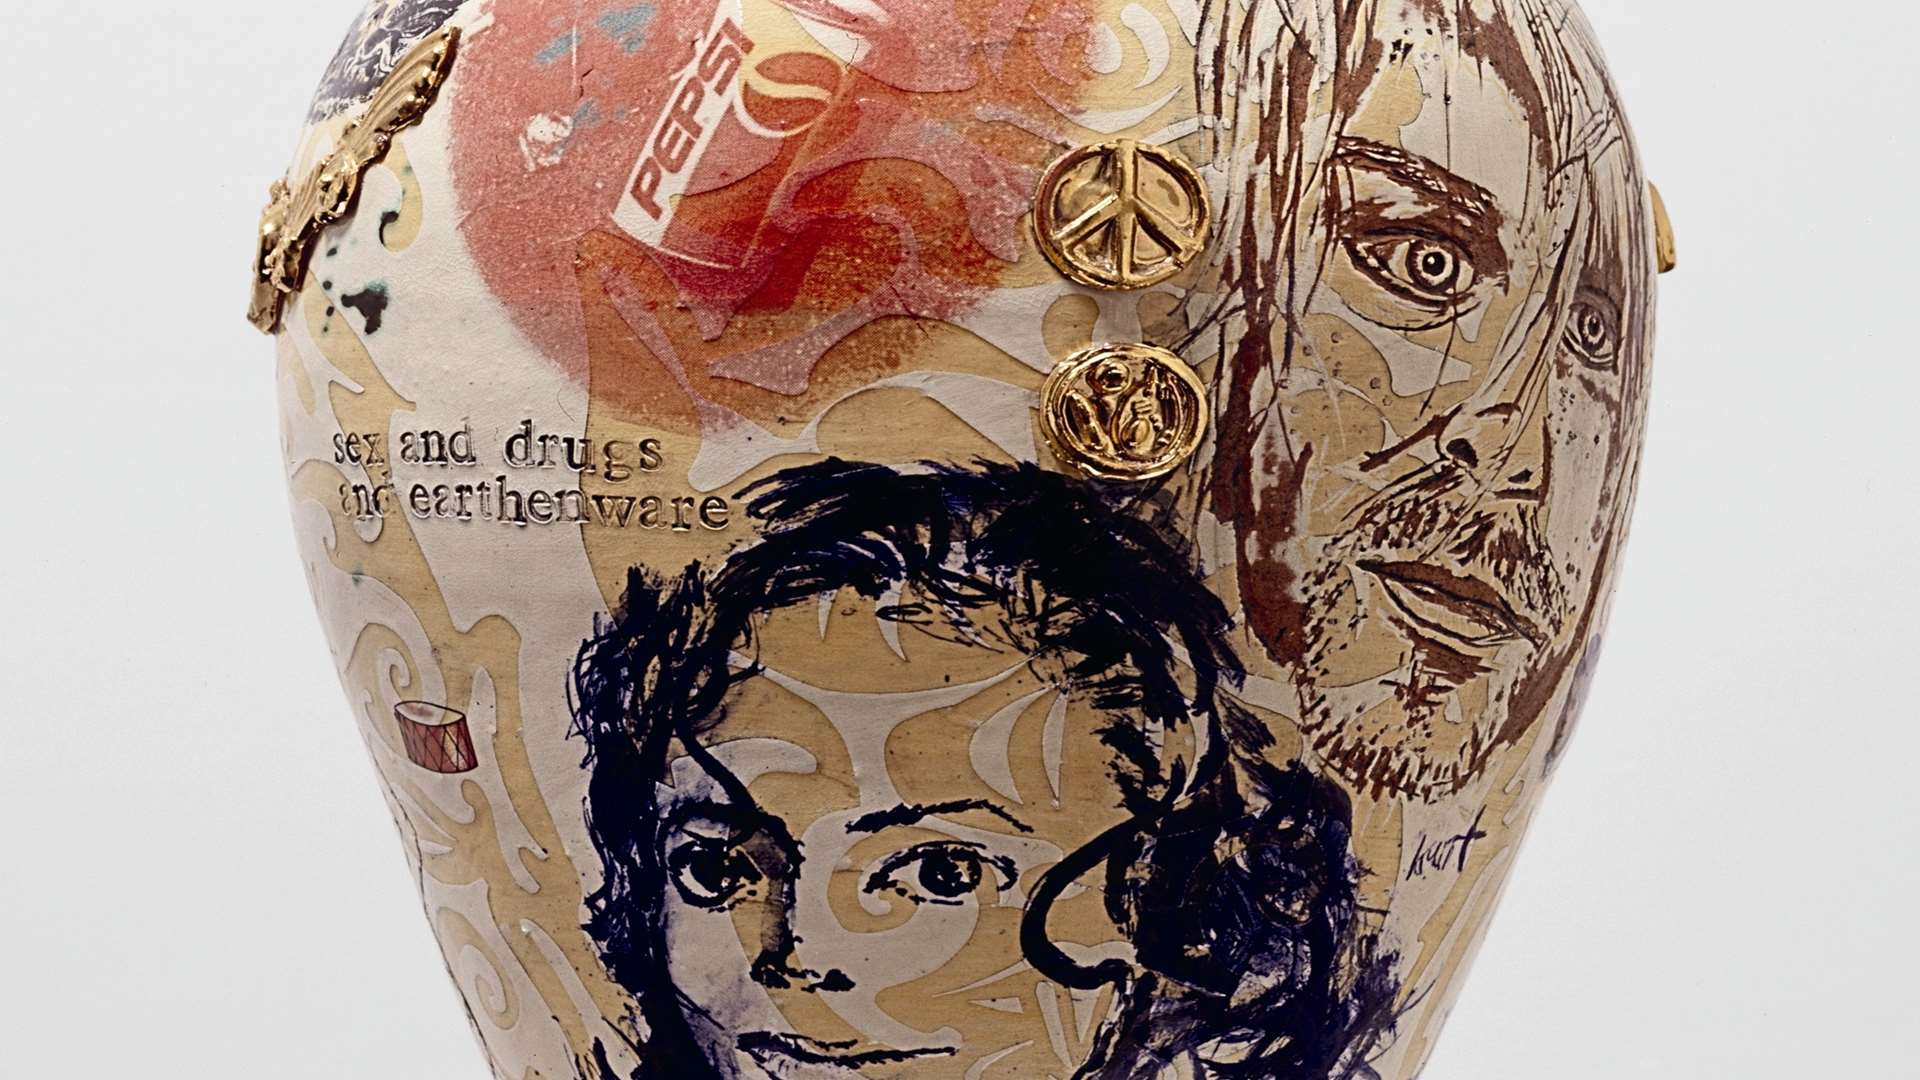 Sex and Drugs and Earthenware by Grayson Perry